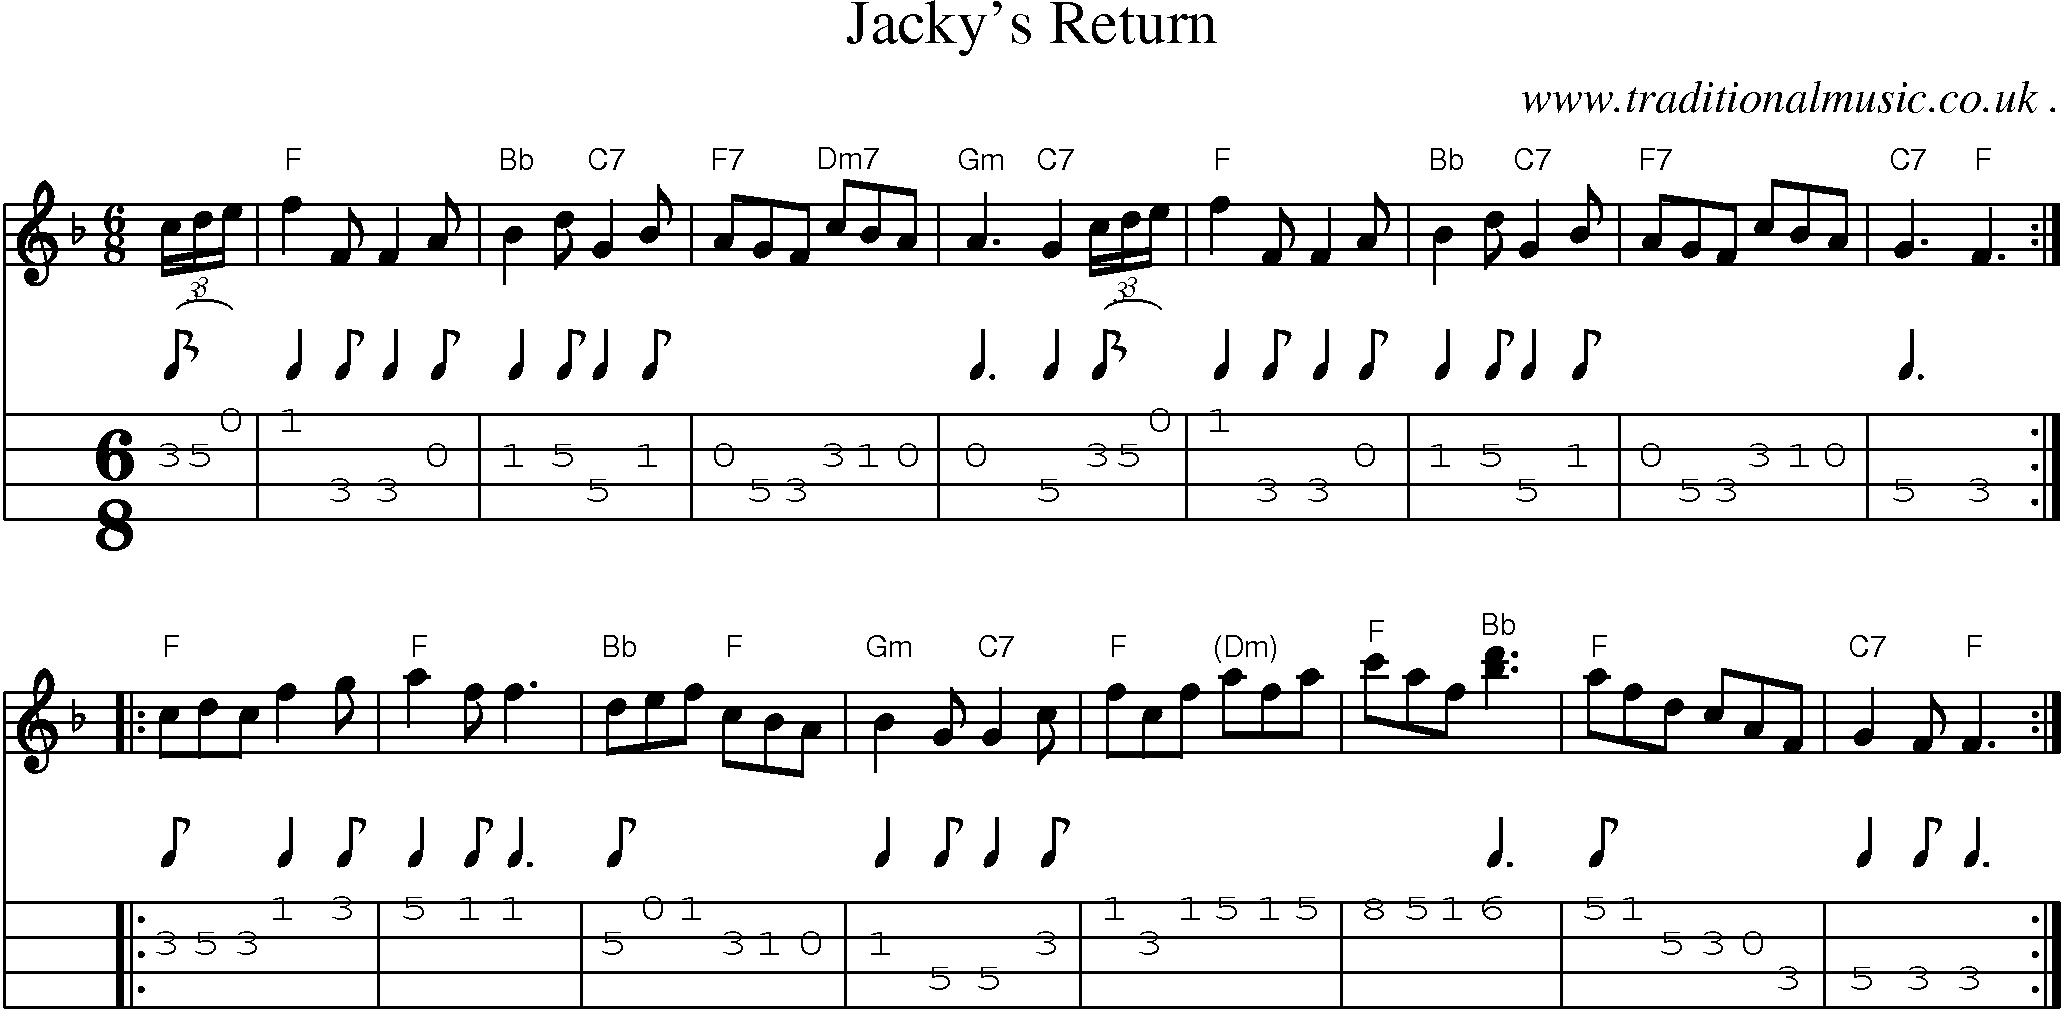 Sheet-music  score, Chords and Mandolin Tabs for Jackys Return